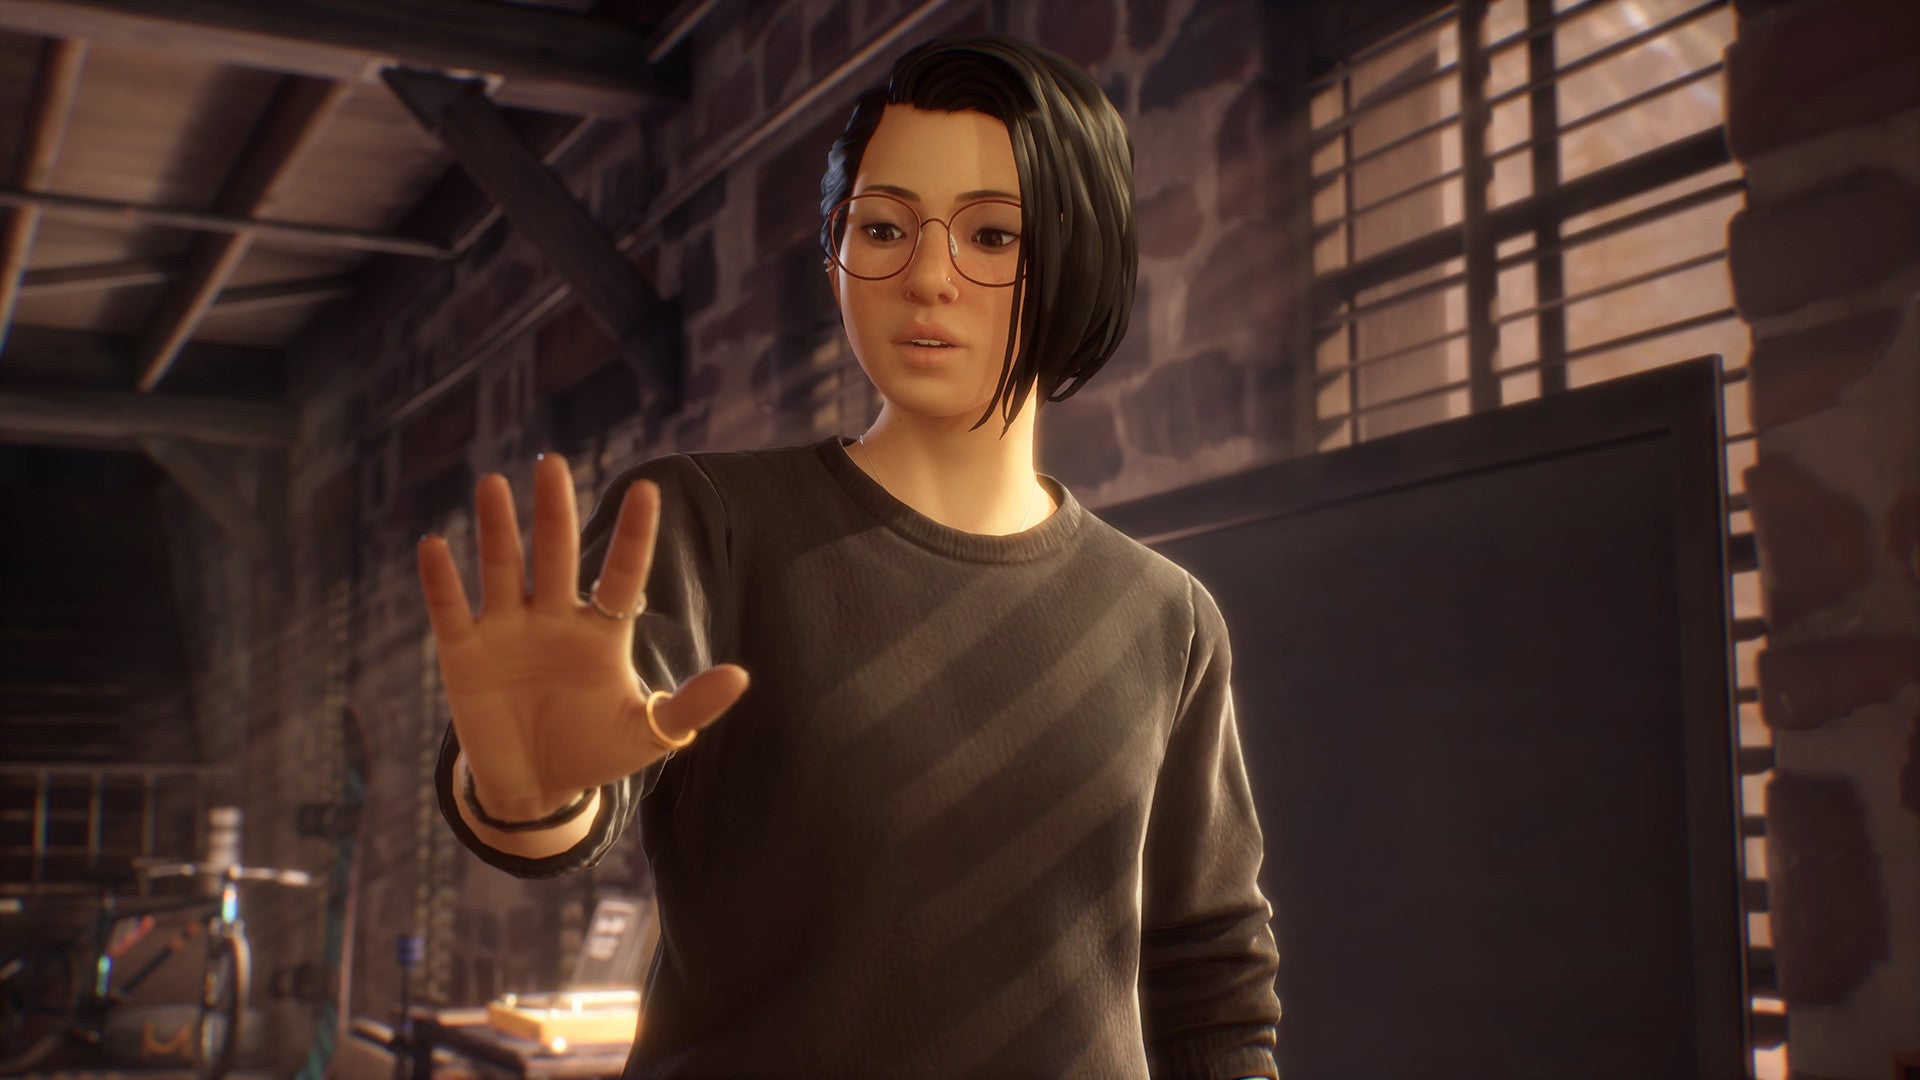 Life Is Strange: True Colors is literally about feelings that rock the world